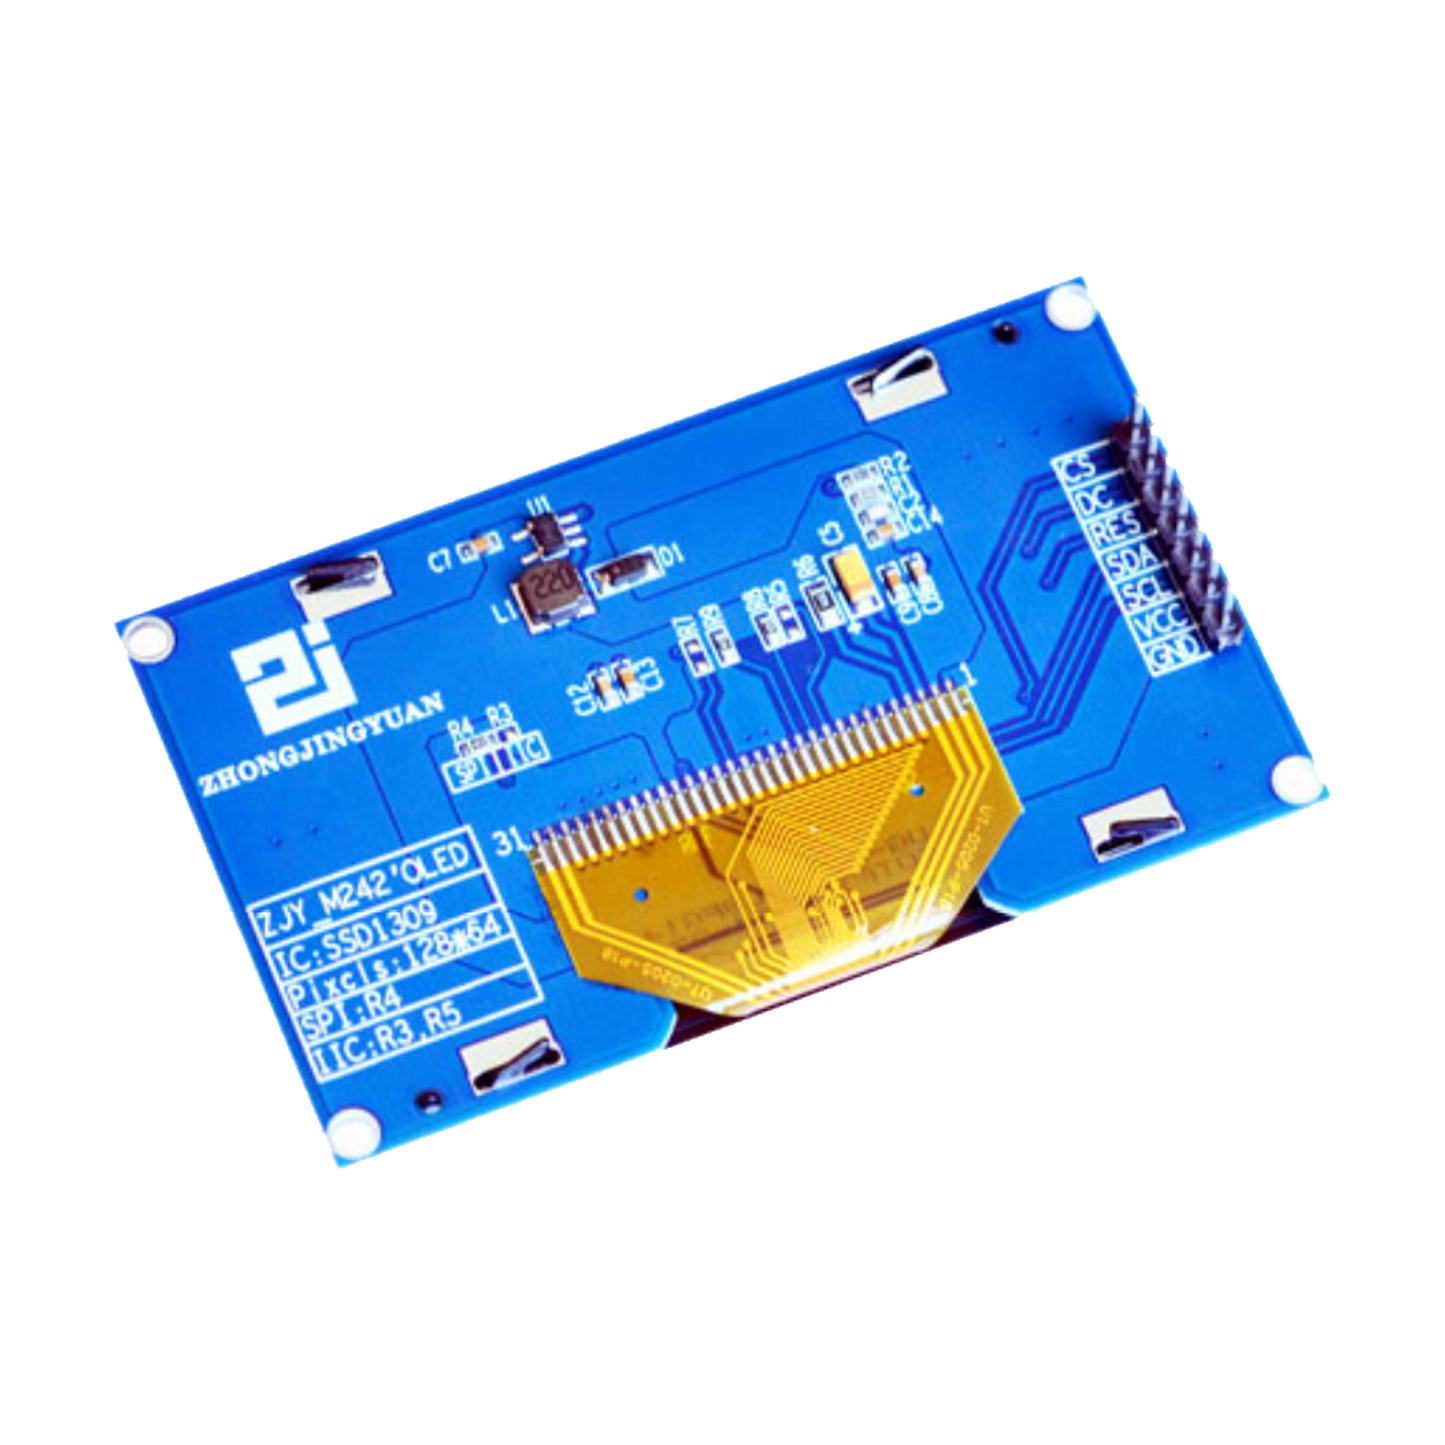 2.42" OLED Graphic Display 128x64 All View - SPI, I2C